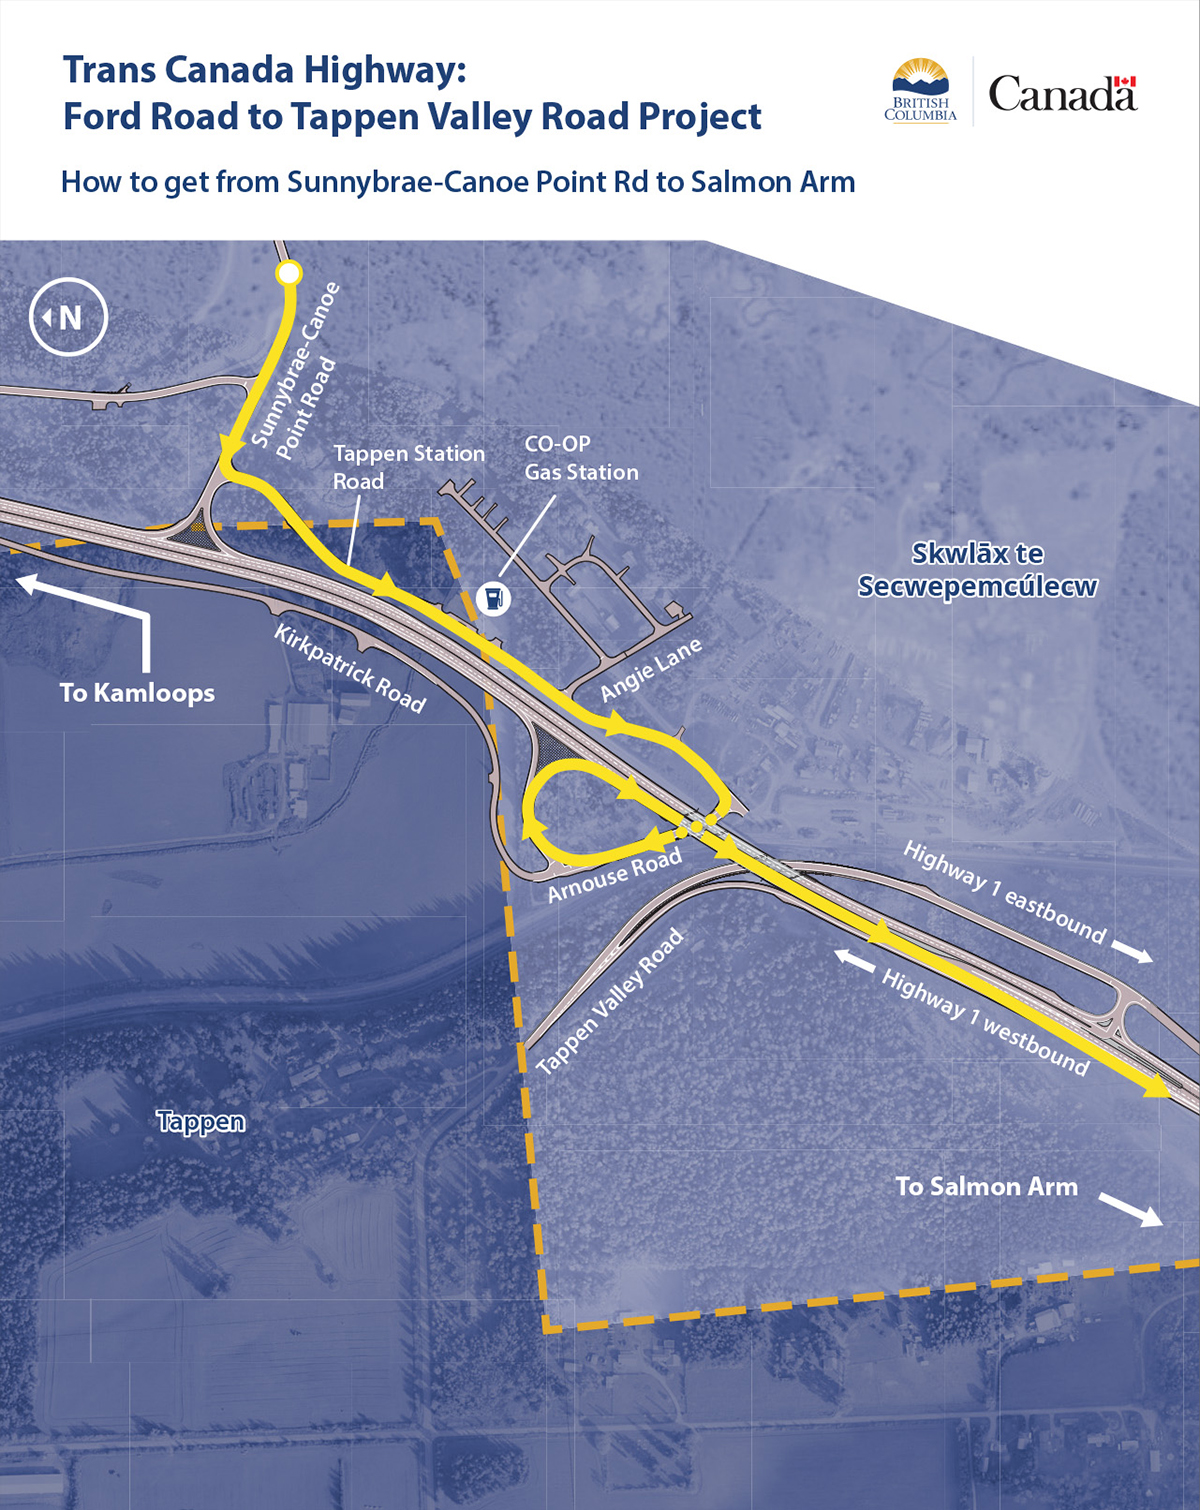 Click to view printable map. From Sunnybrae-Canoe Point Road turn left onto Tappen Station Road, and continue past the Tappen Co-op. Then turn right onto Arnouse Road and continue underneath the Tappen Overhead Bridge to access the right-hand entrance ramp. Accelerate on the ramp and merge onto Trans-Canada Highway 1 Eastbound lane when safe.